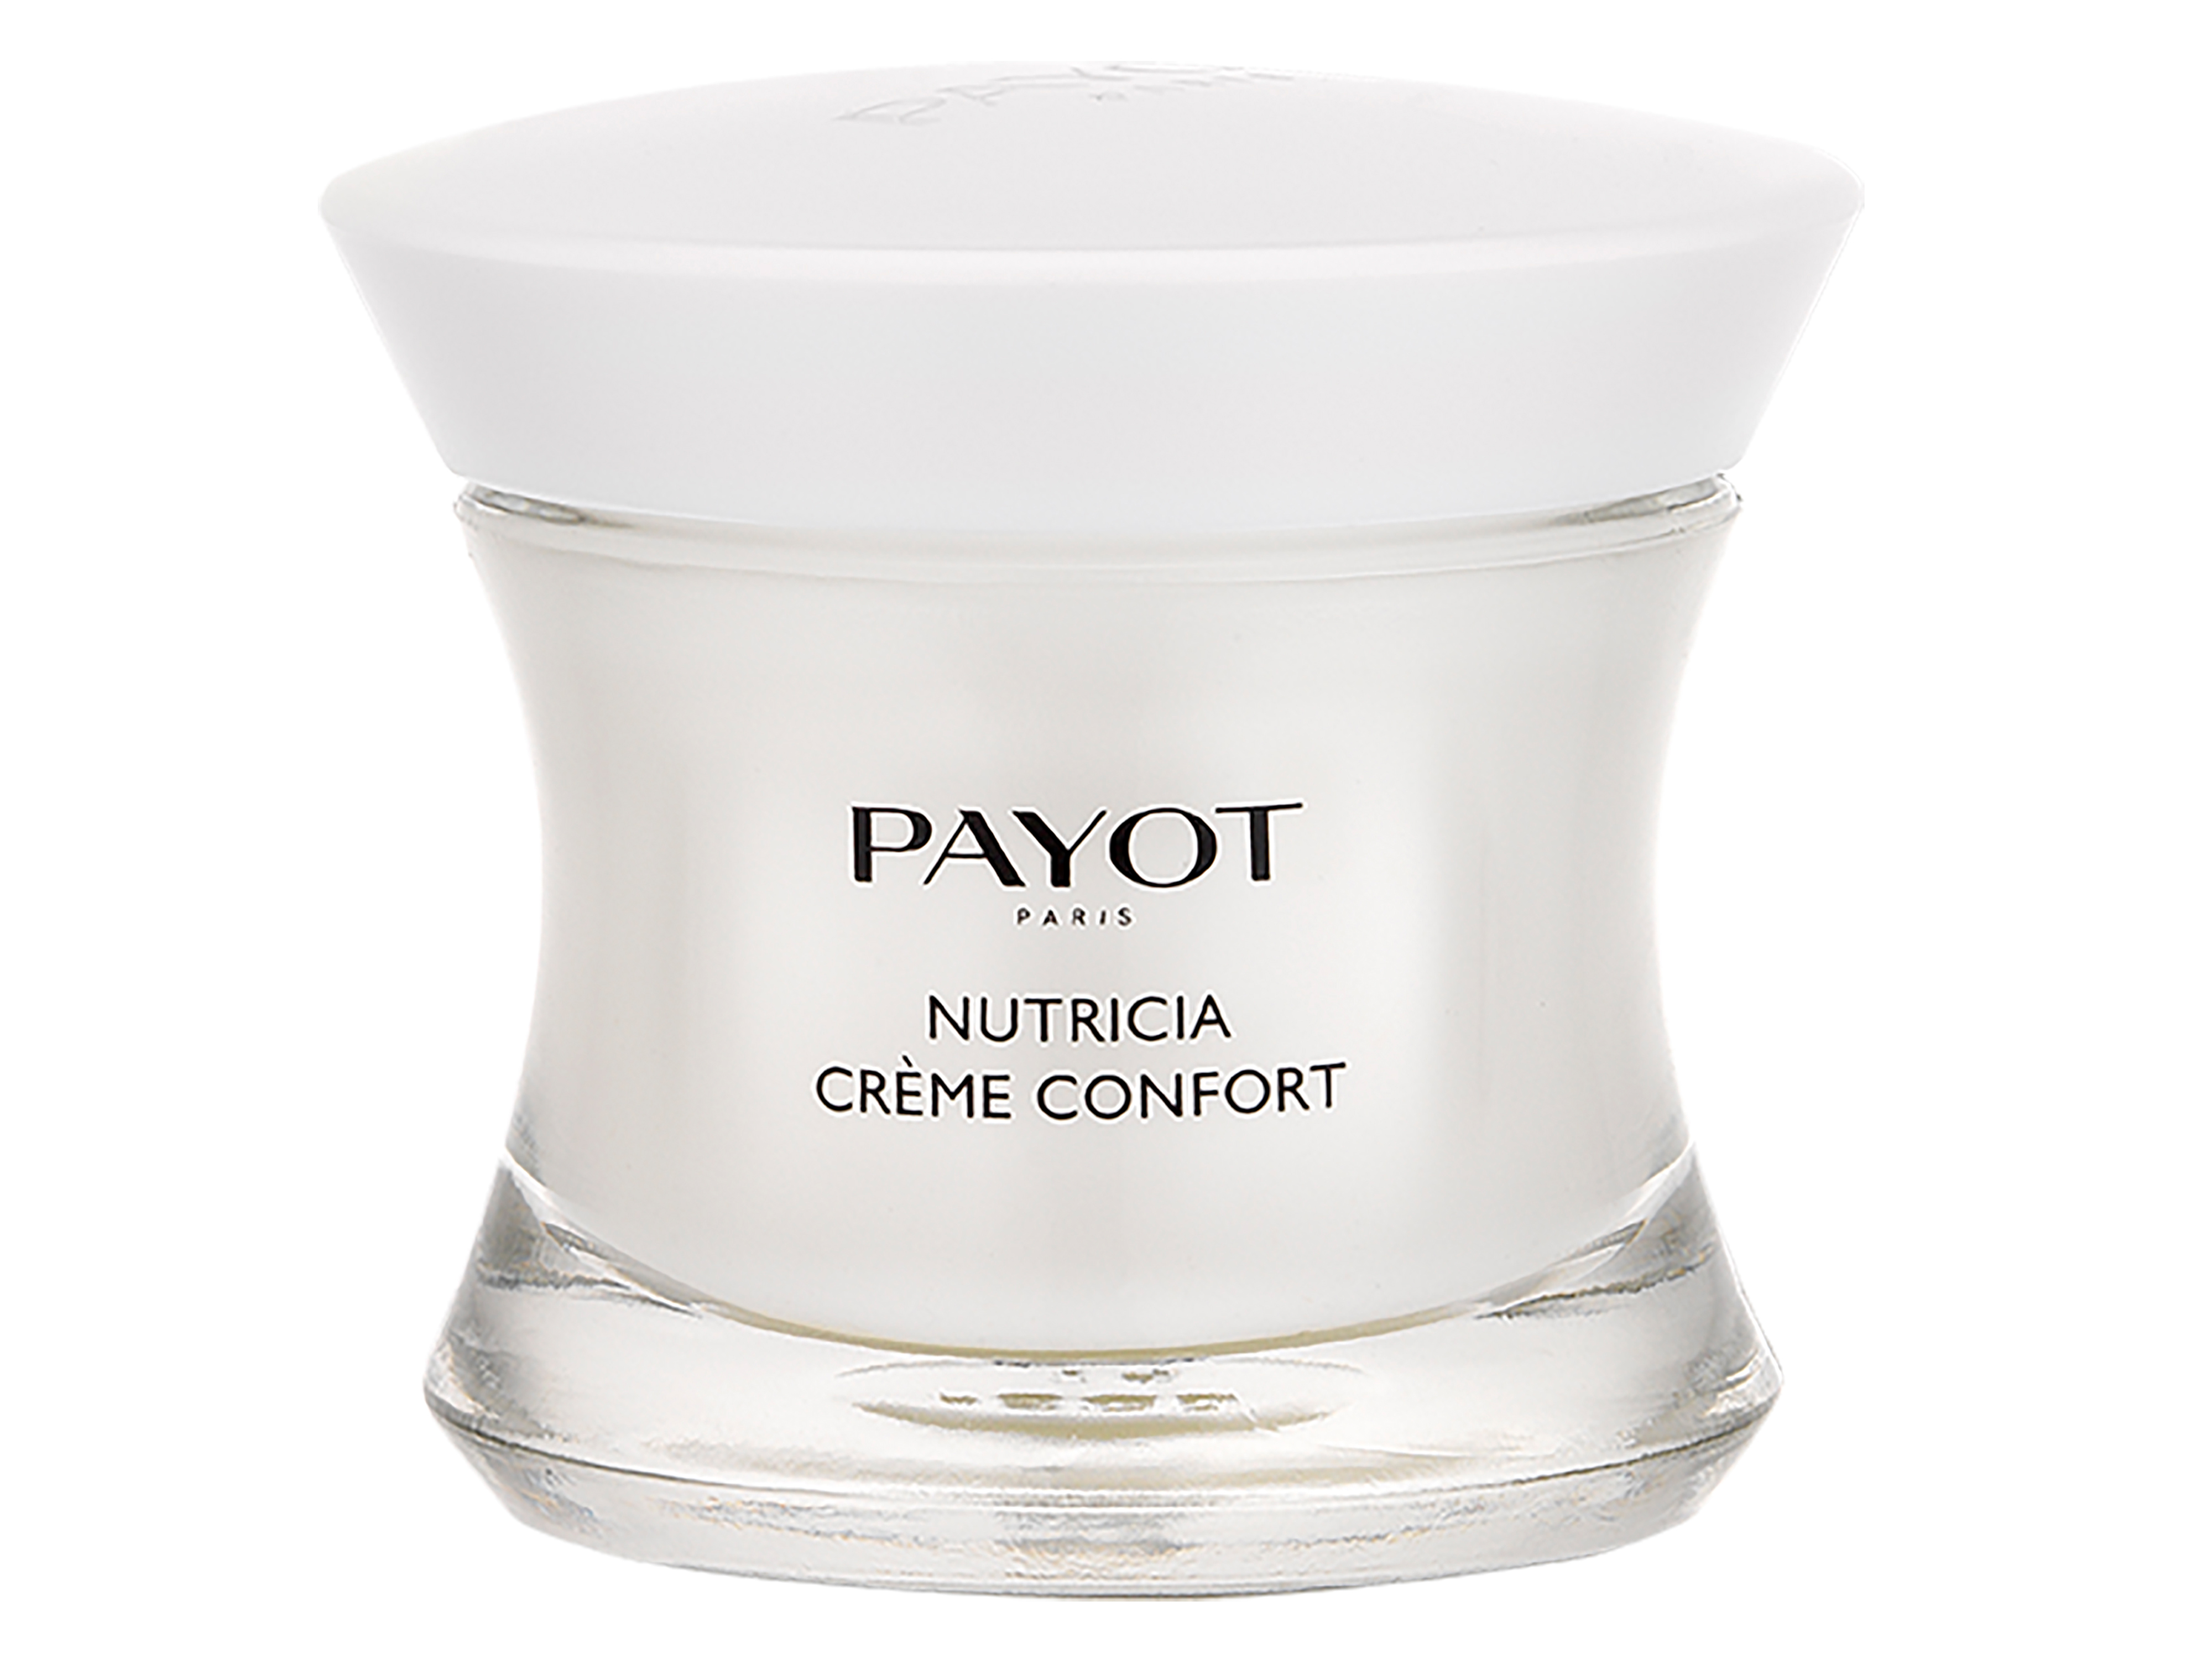 Payot Payot Nutricia Creme Confort, 50